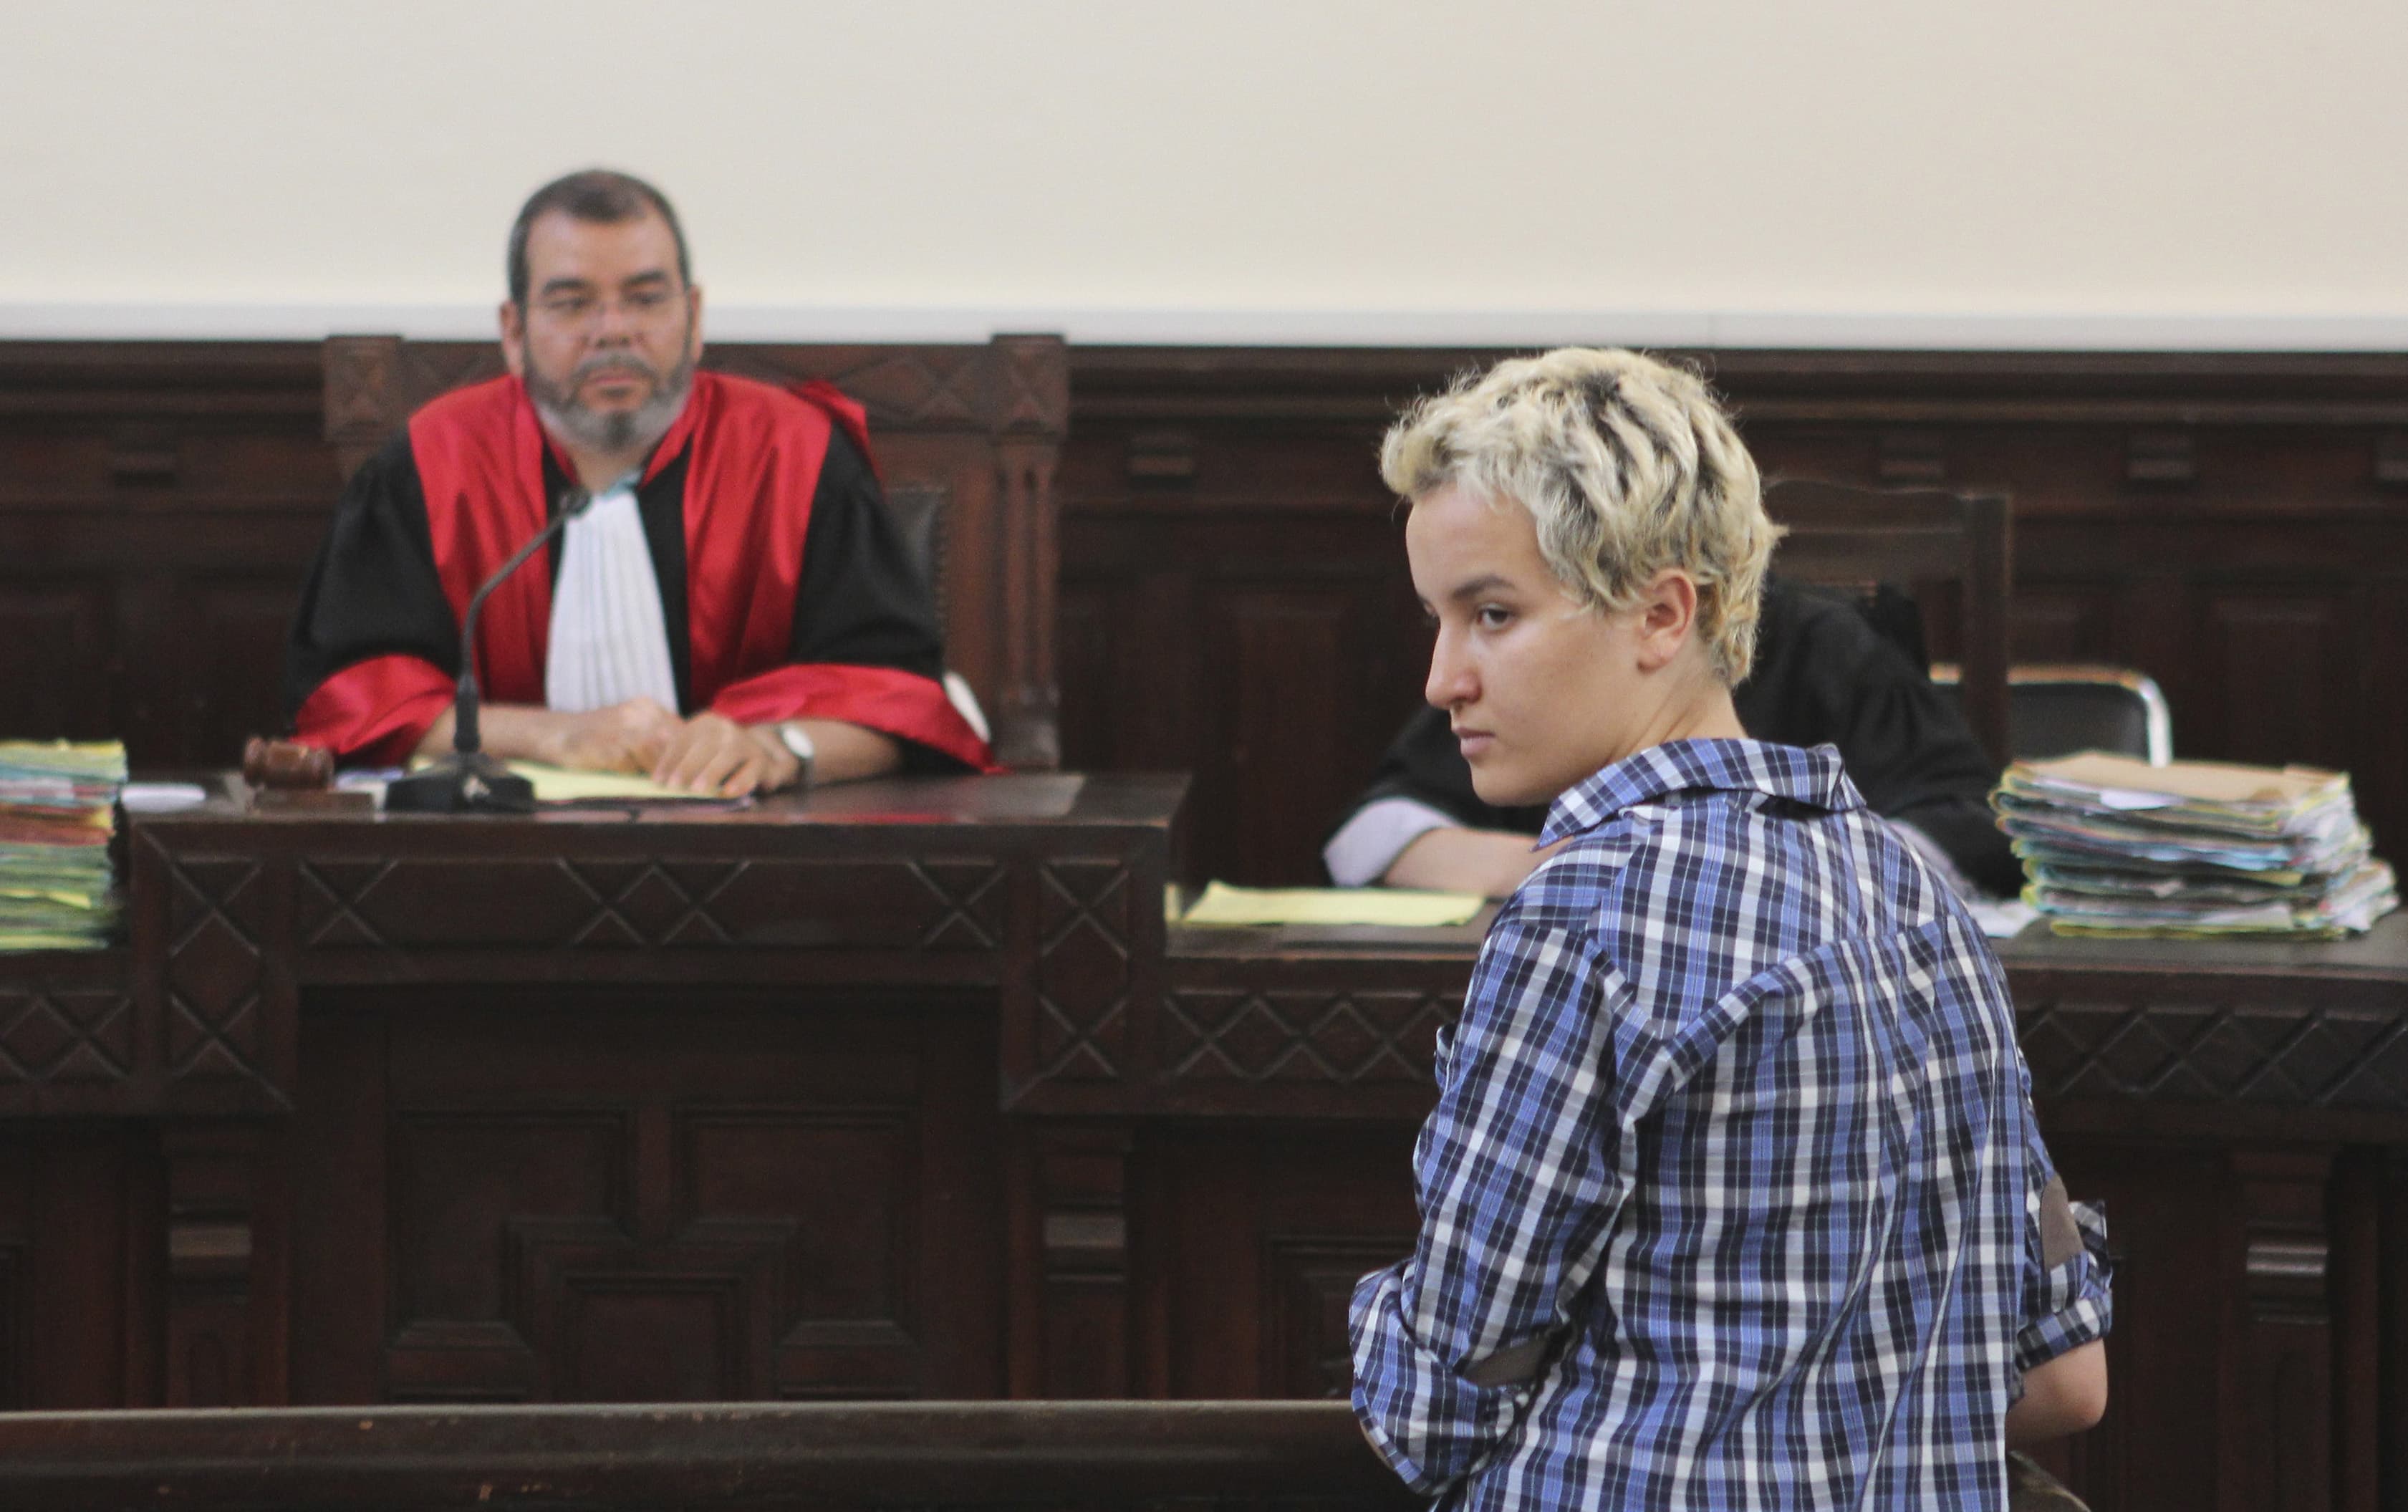 Amina Sboui (R), the Tunisian member of the Ukrainian feminist group Femen, appears in a courtroom in Sousse on 4 July 2013, REUTERS/Med Amine Benaziza